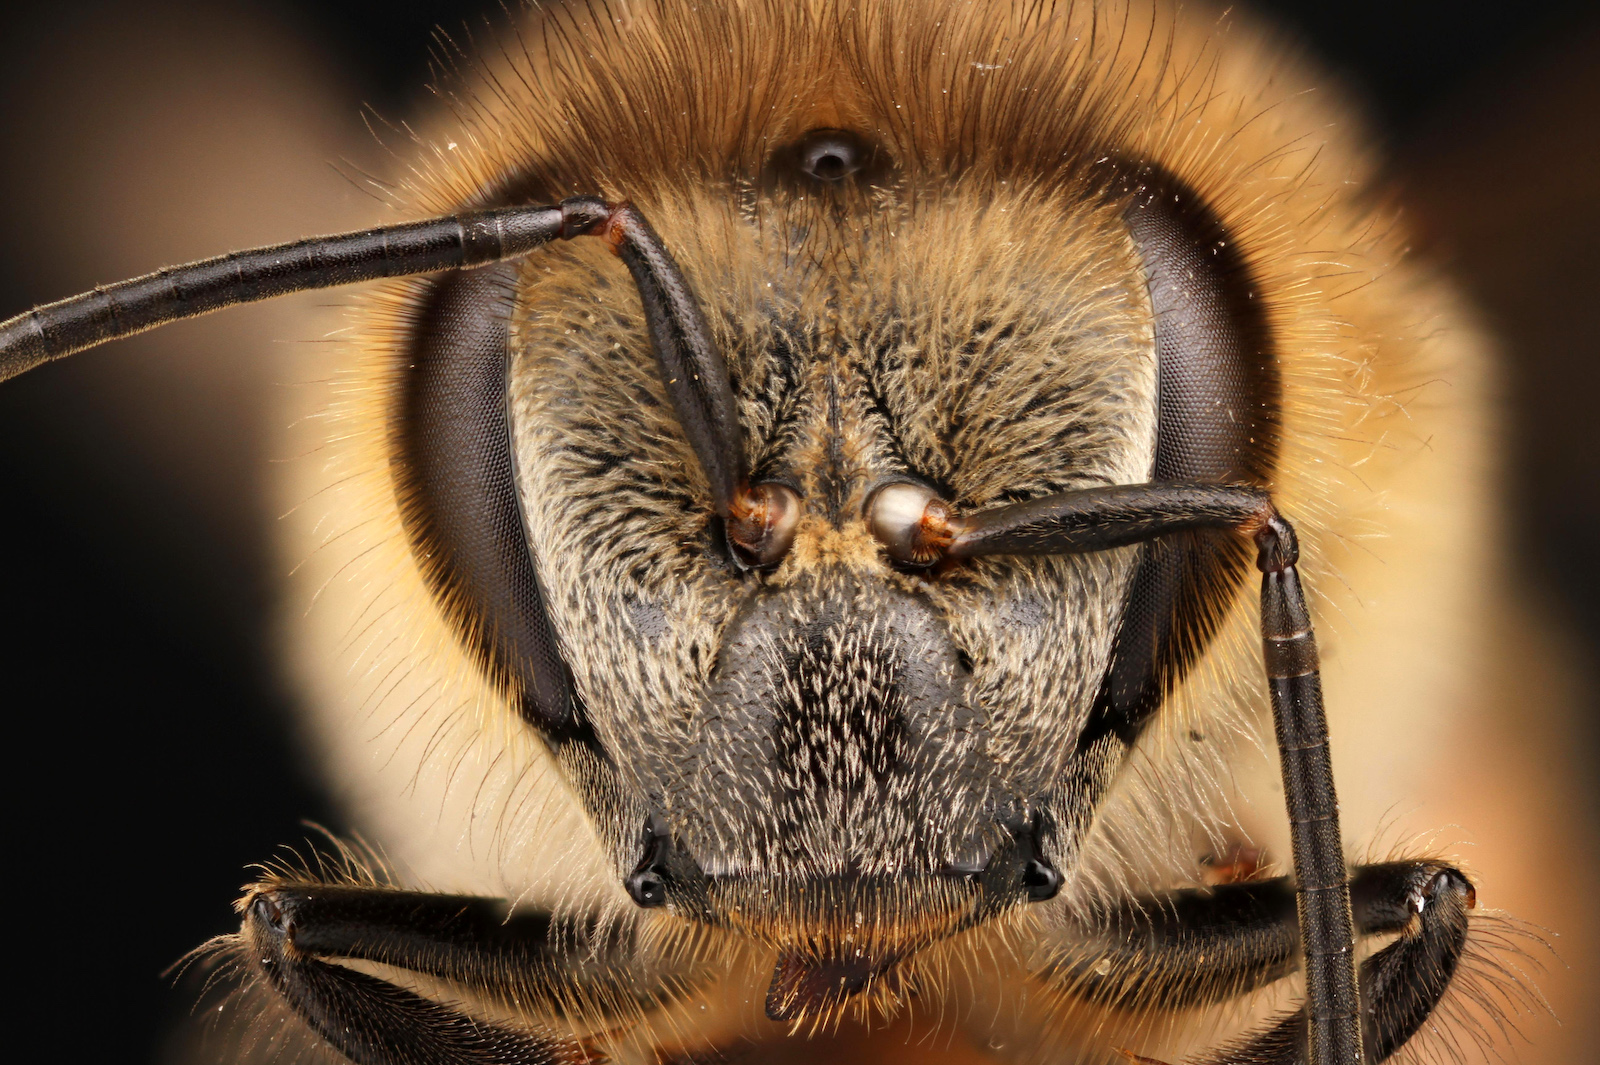 New Research Suggests Bees Are Sentient